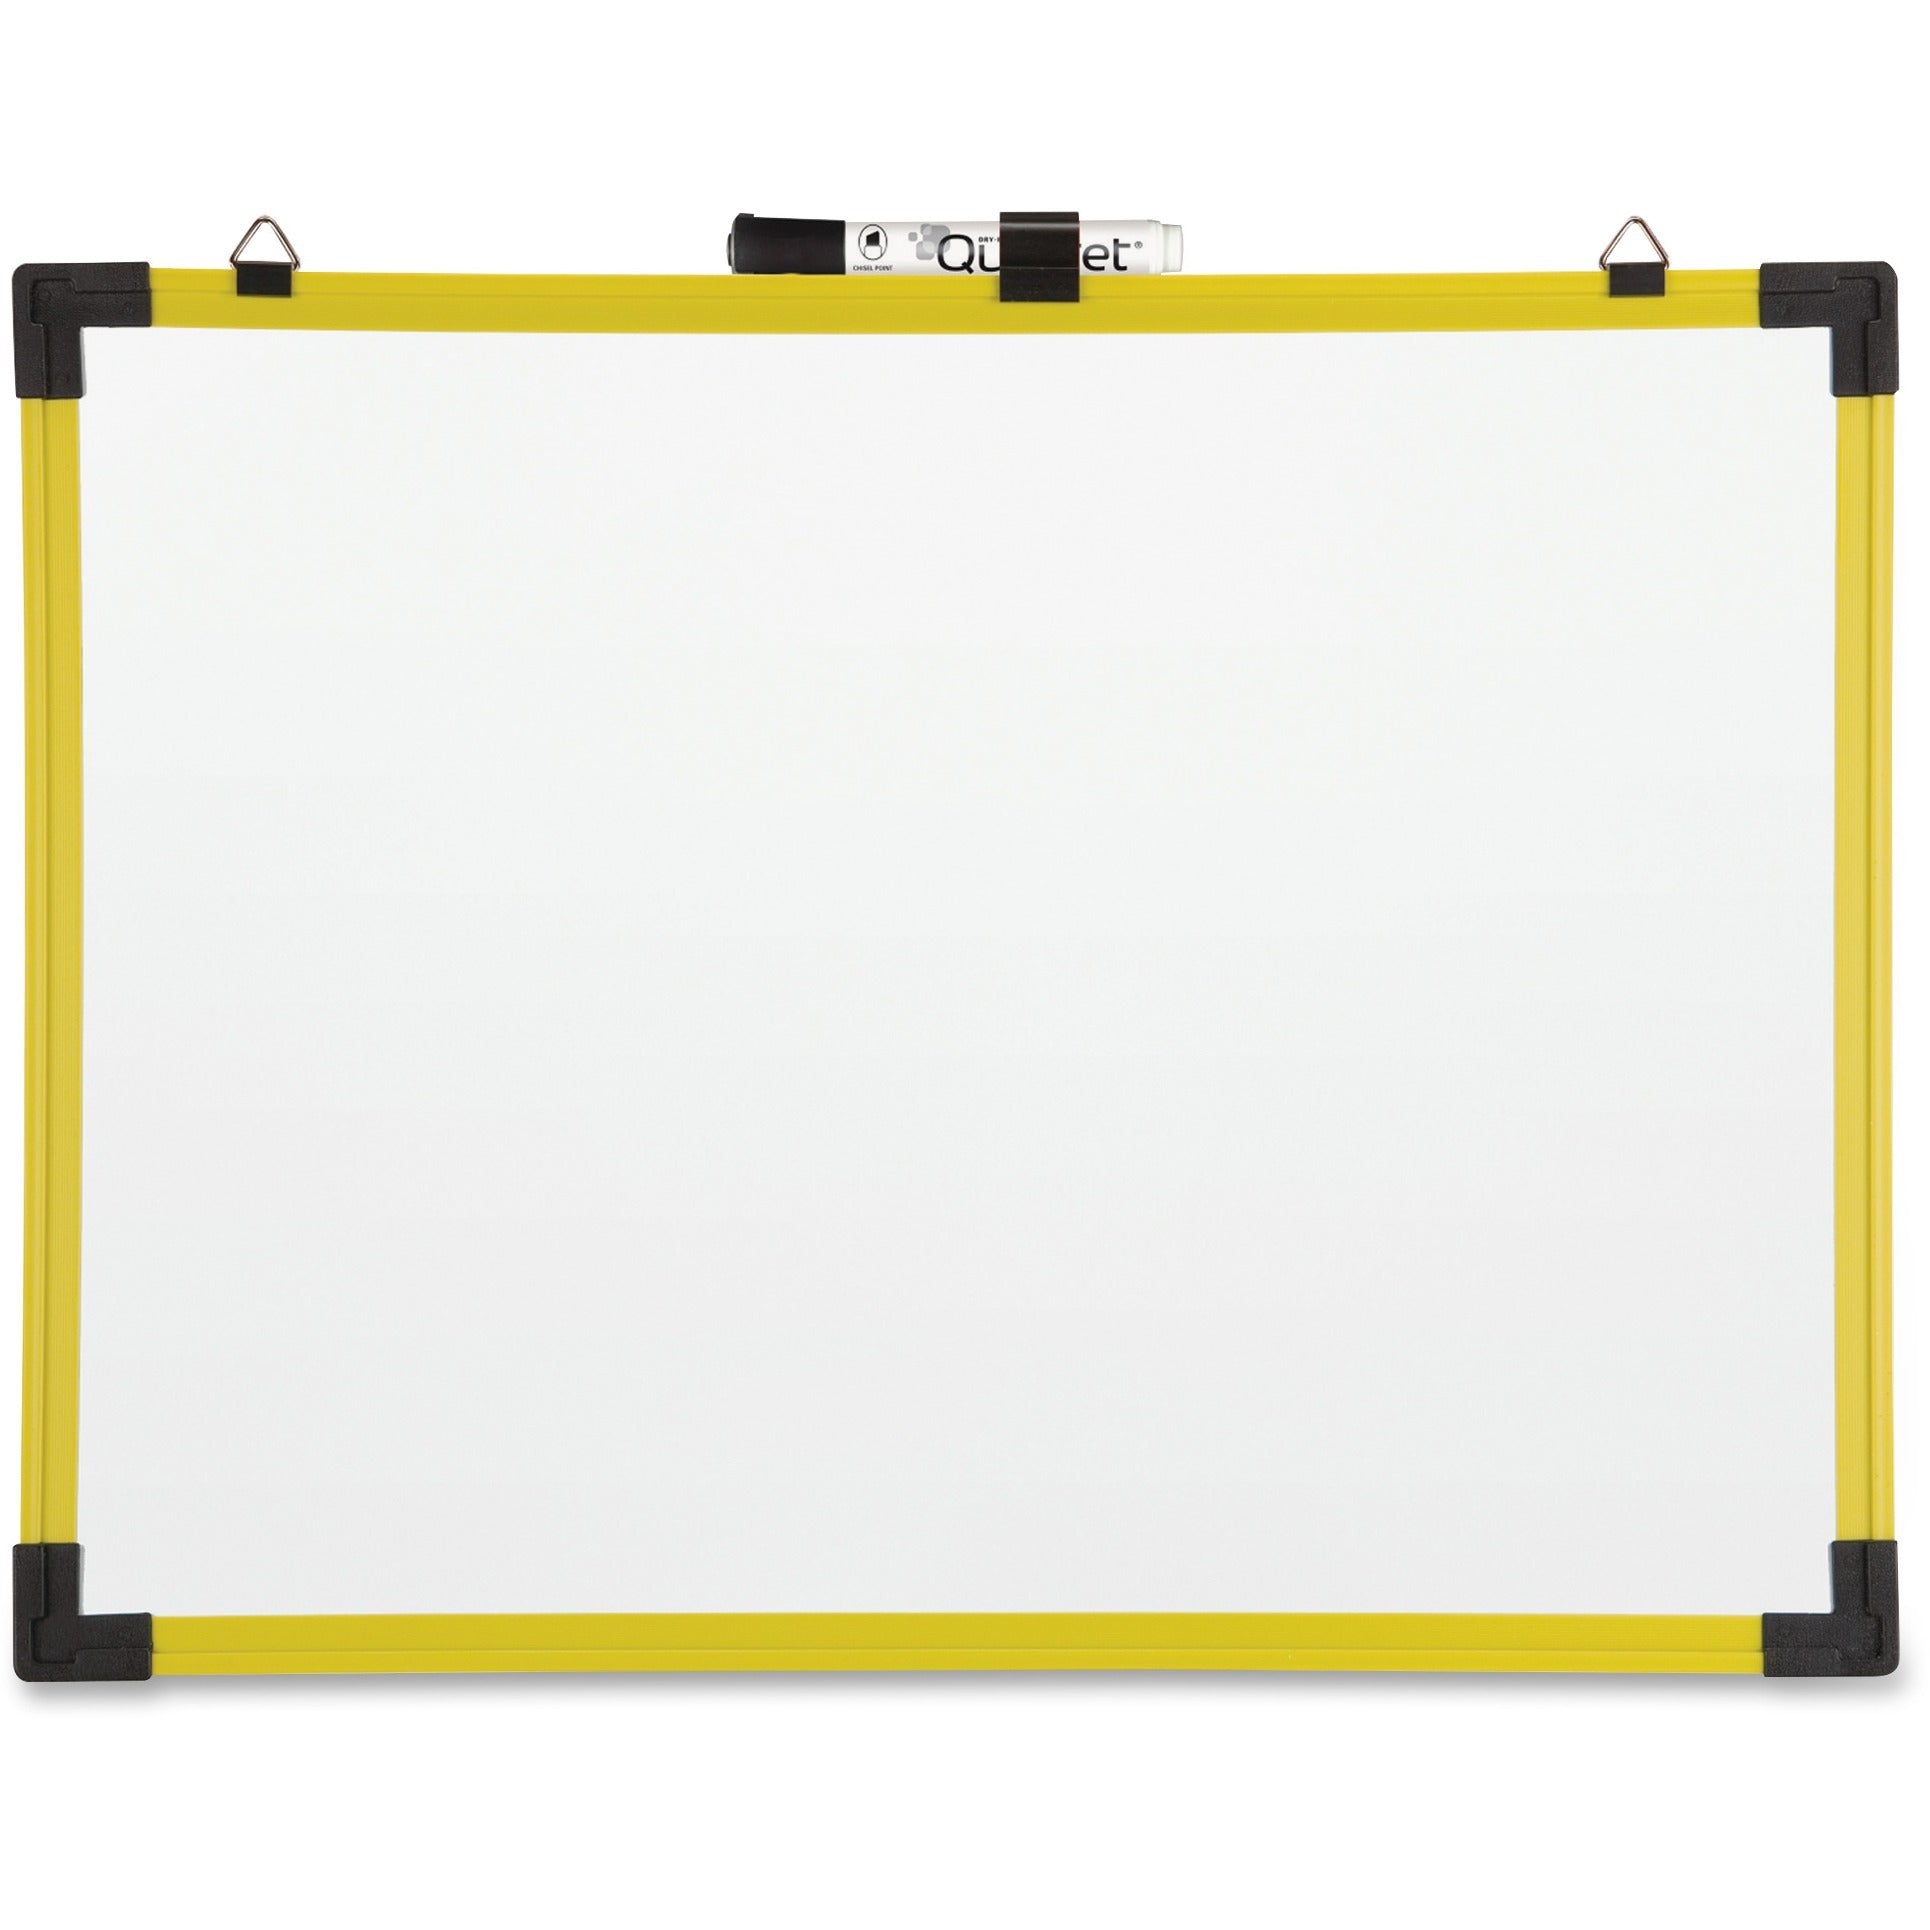 quartet-industrial-magnetic-whiteboard-48-4-ft-width-x-36-3-ft-height-white-painted-steel-surface-bright-yellow-aluminum-frame-rectangle-horizontal-magnetic-1-each_qrt724126 - 2